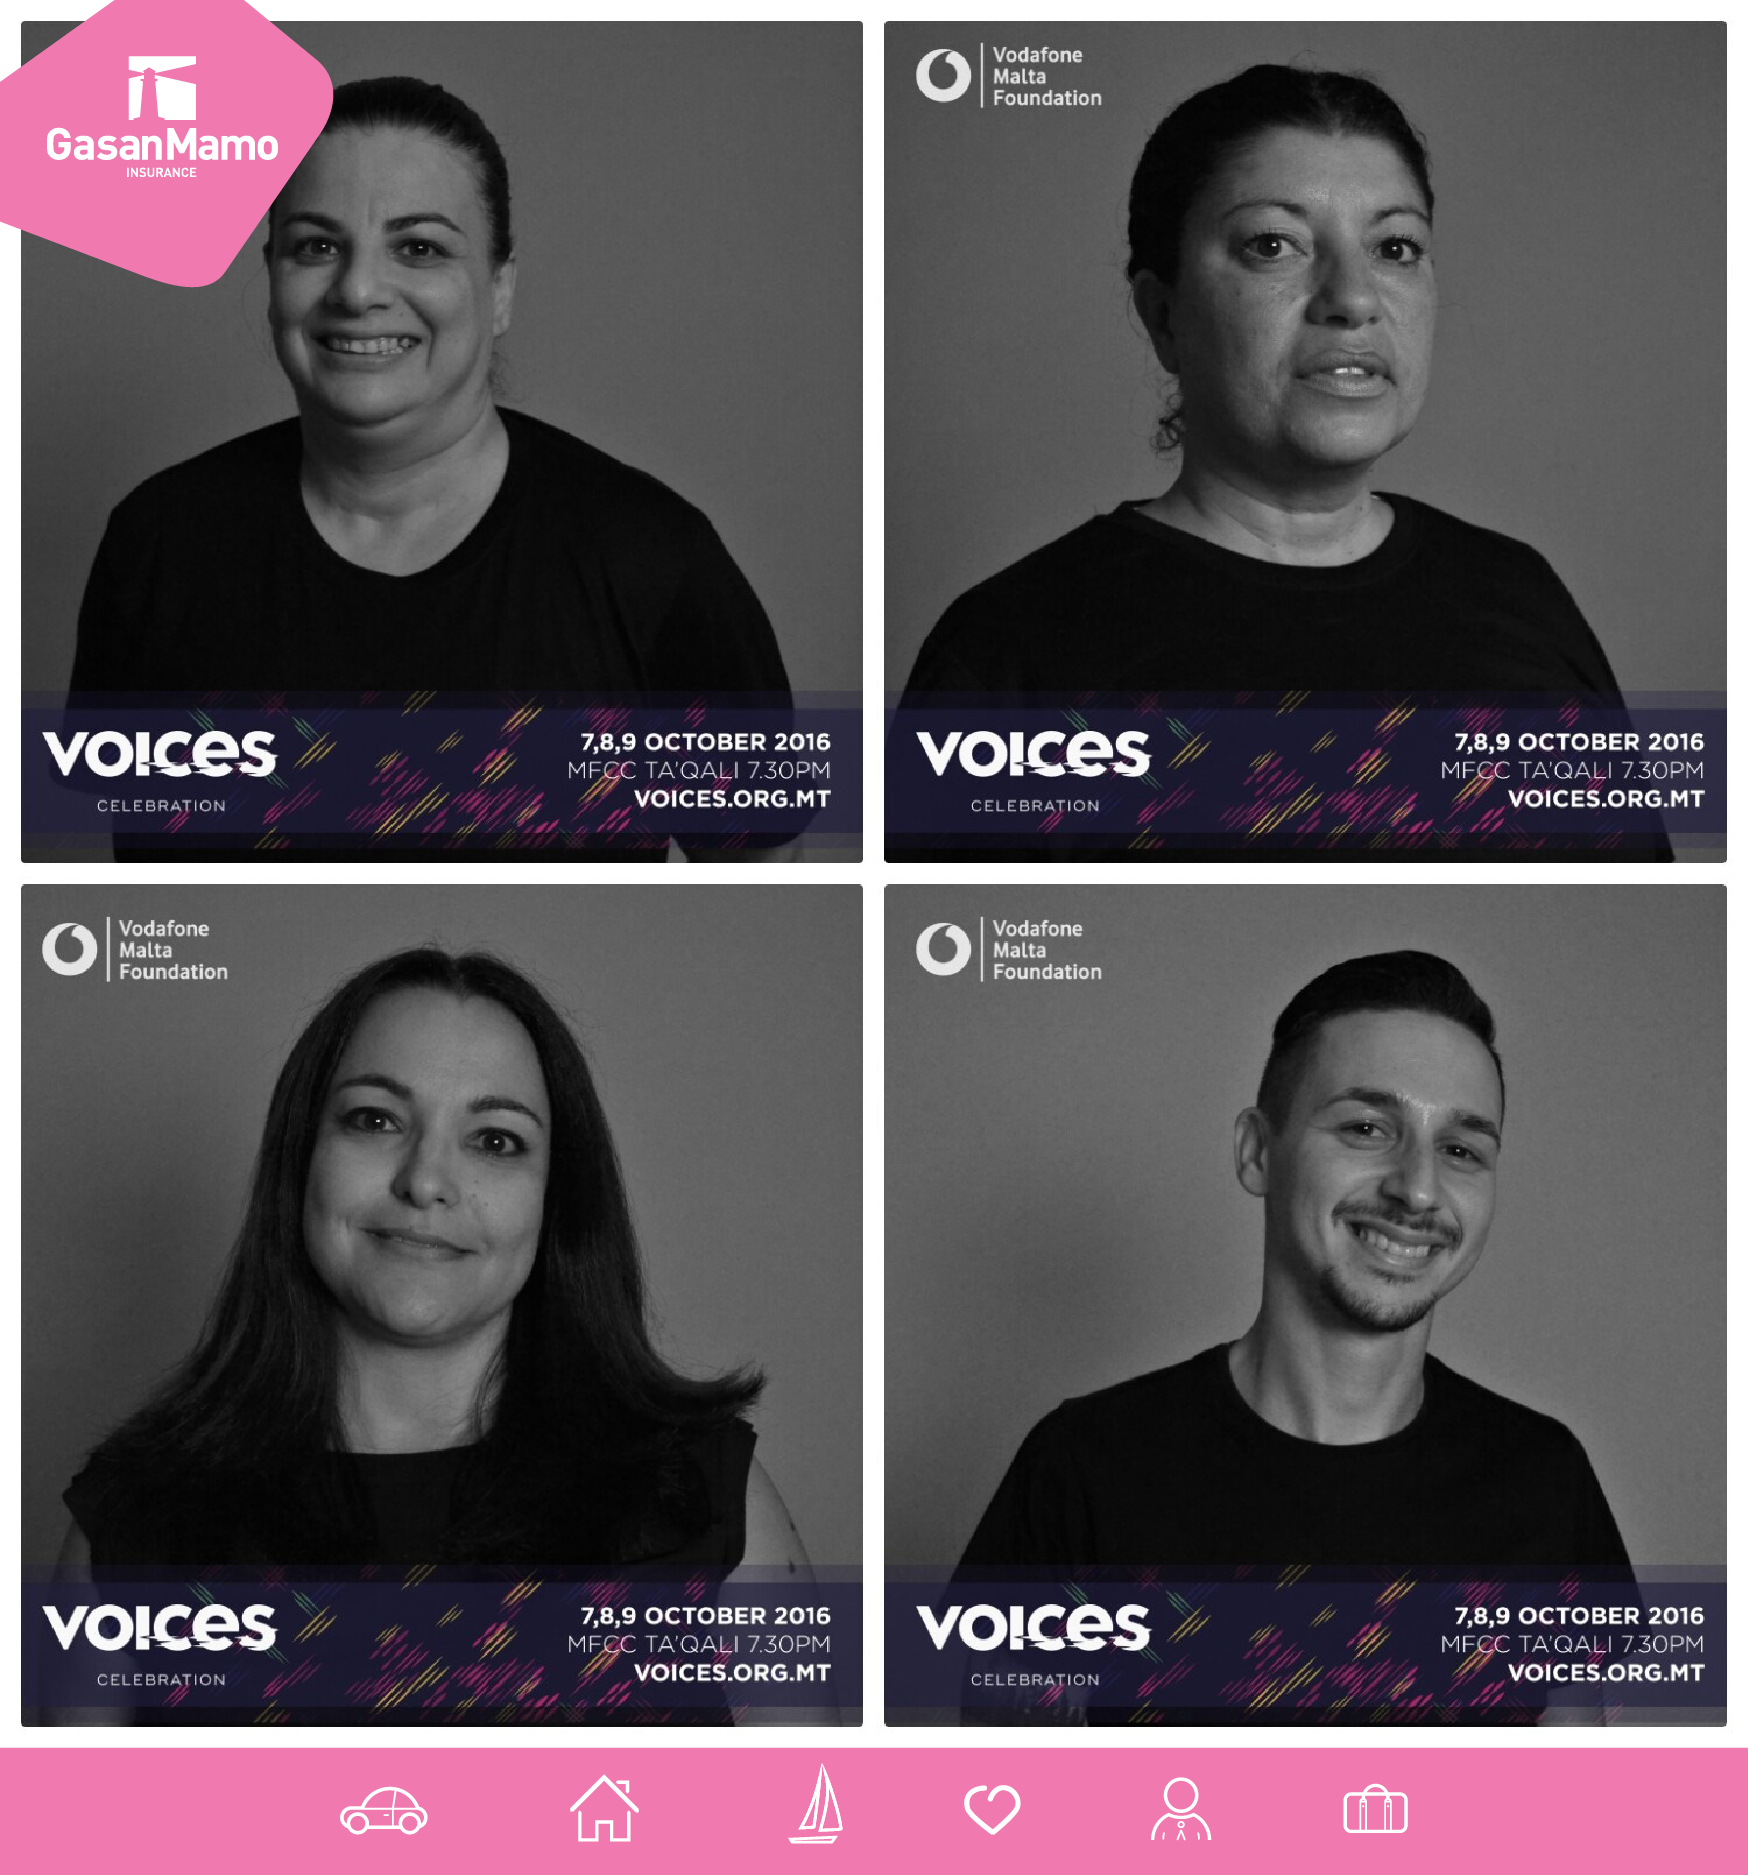 GasanMamo Employees Join Talented Artists For This Year’s Voices